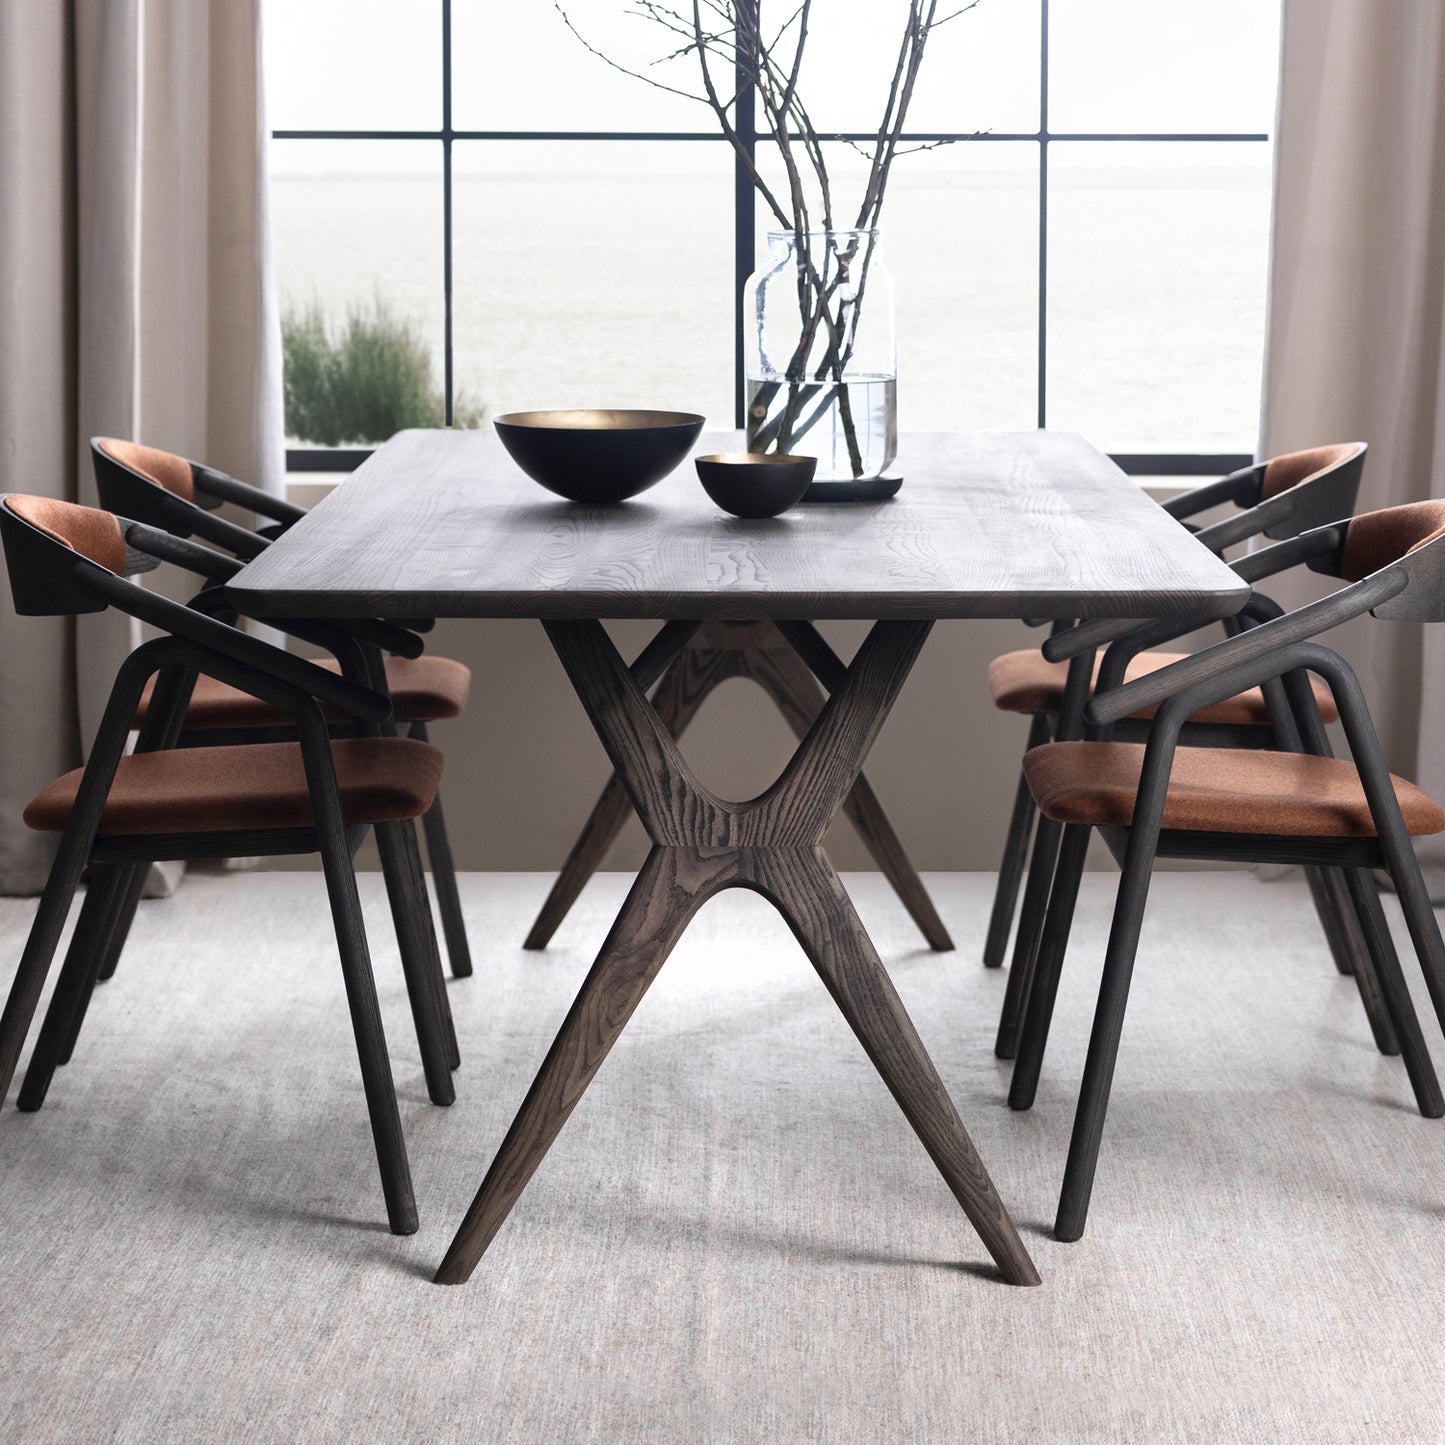 Rose Hill Ash Dining Table With Rounded Corners With Brass - 200cm Extending